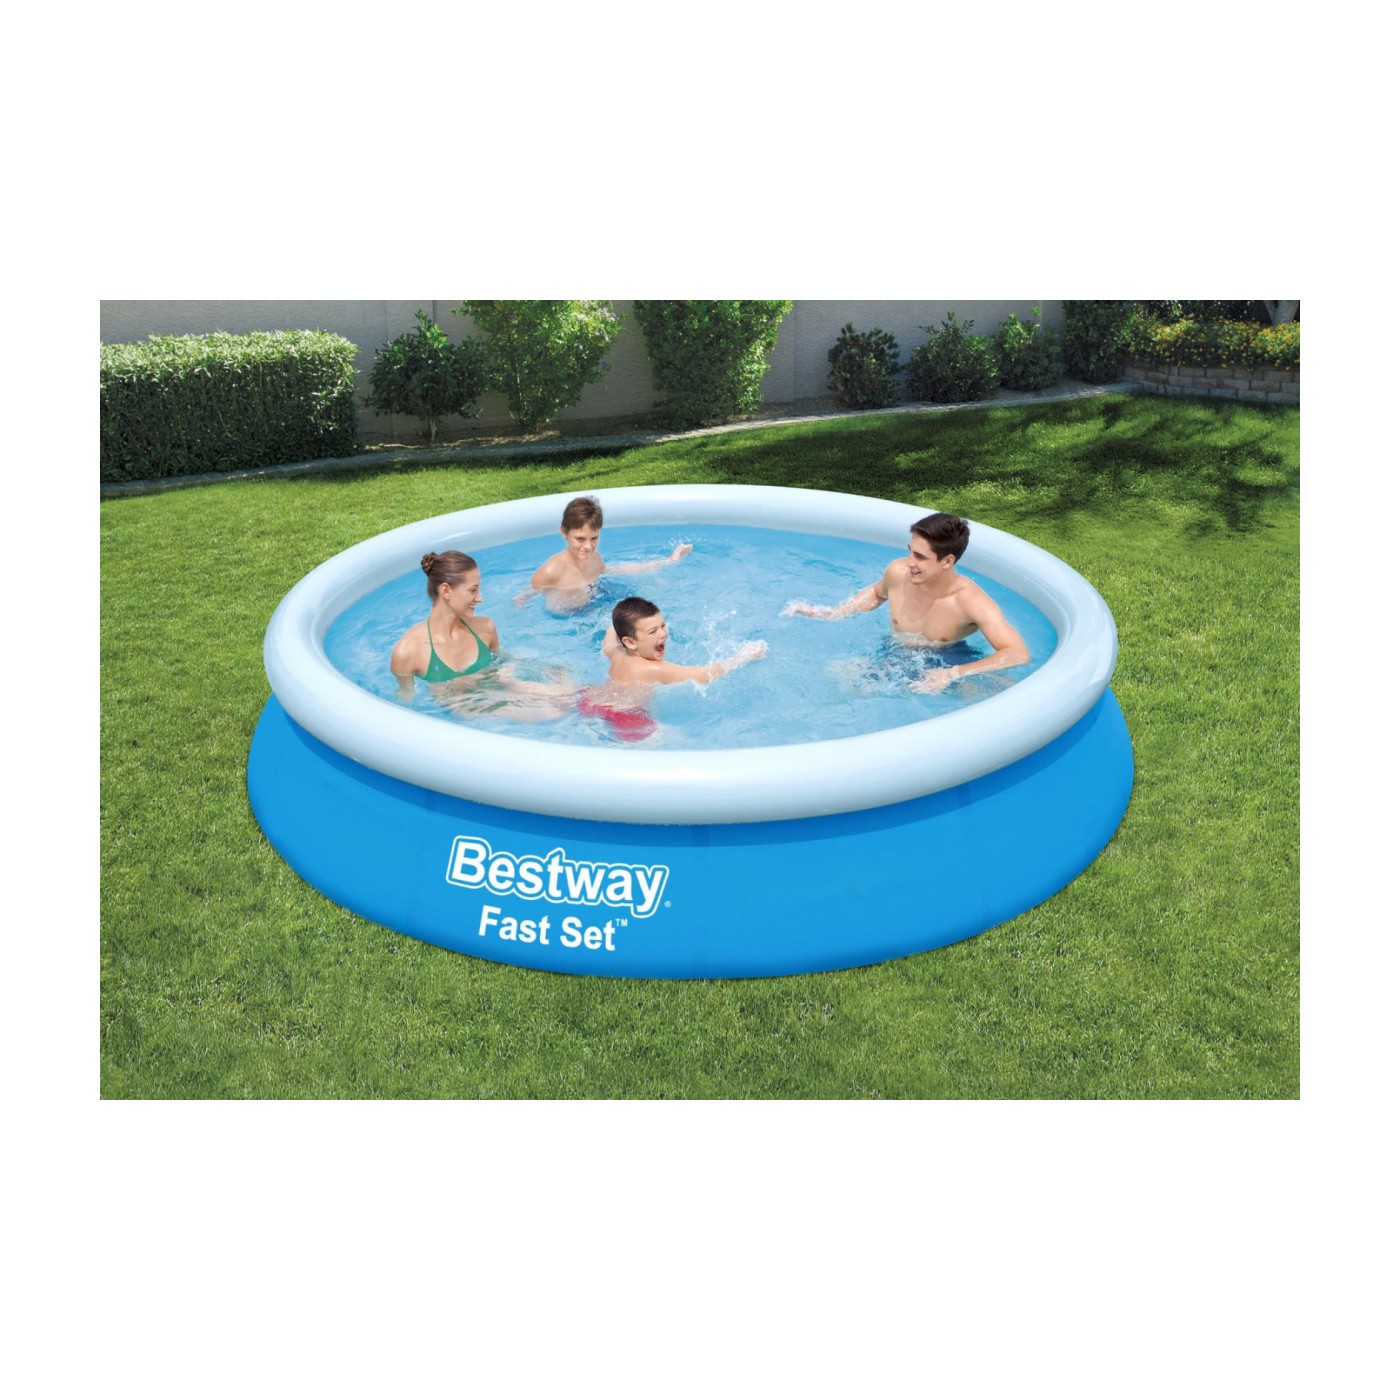 Swimming pool of stretcher 12FT 366x76cm BESTWAY